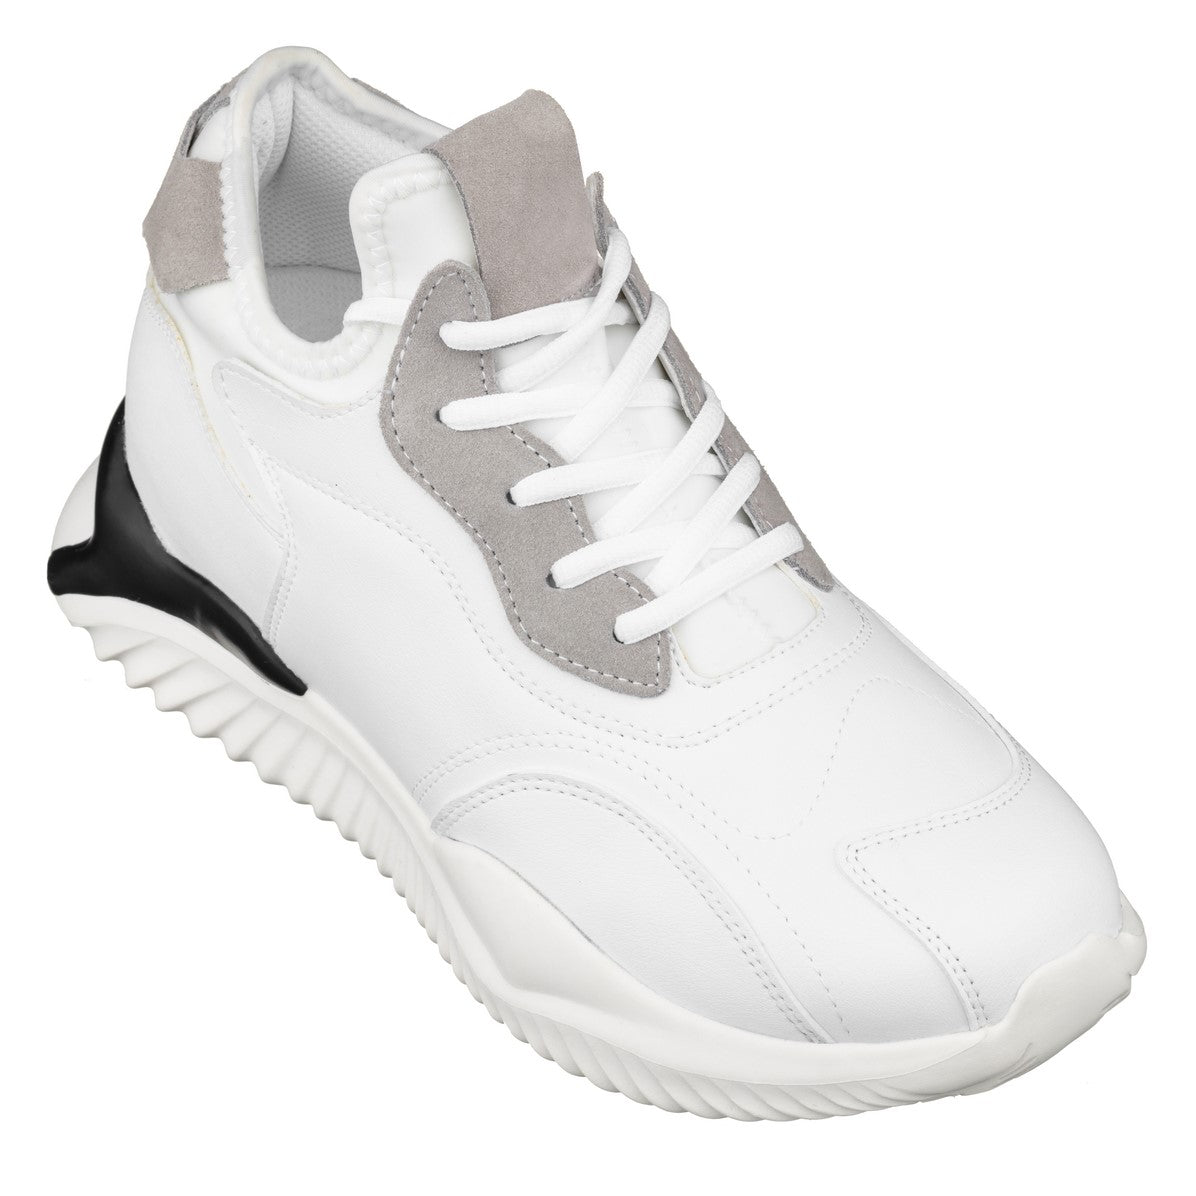 Elevator shoes height increase CALTO - S4204 - 3.2 Inches Taller (White) - Lightweight Sneakers